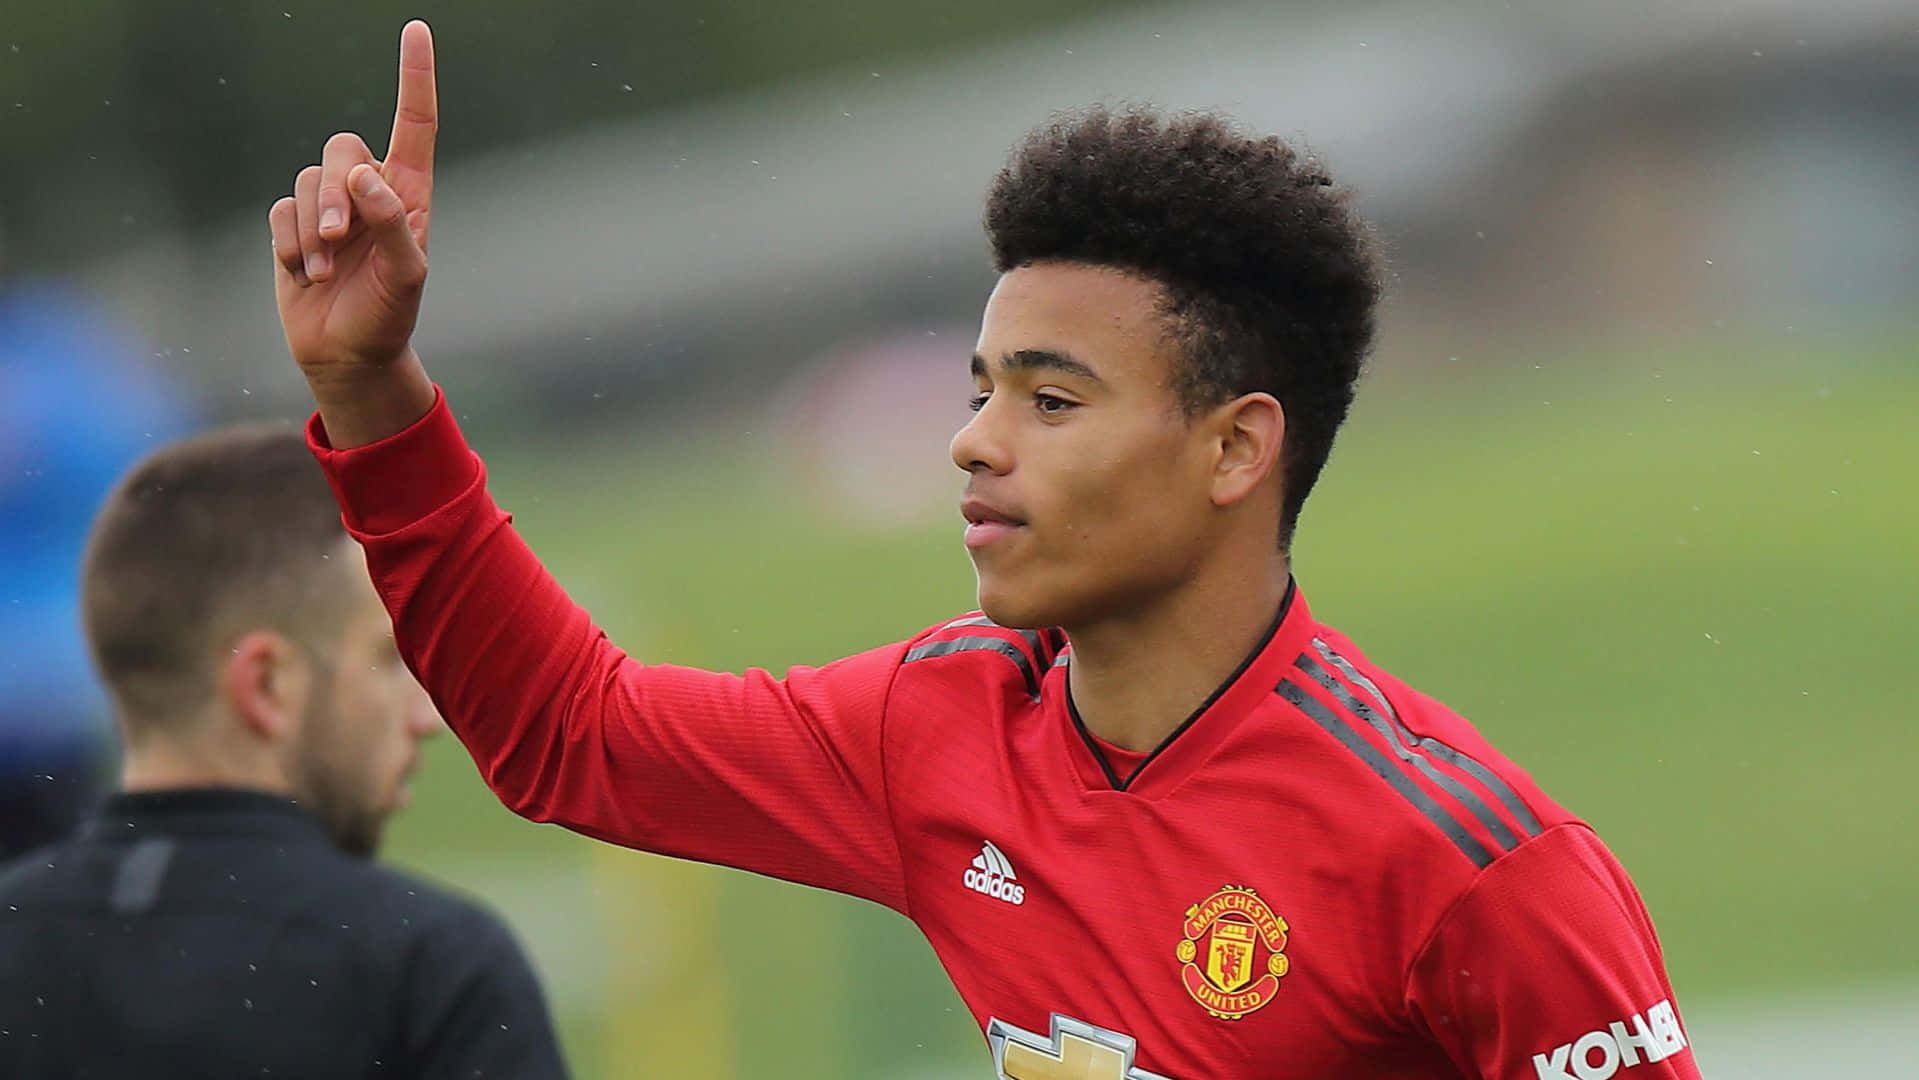 Manchester United's Rising Star Mason Greenwood in Action